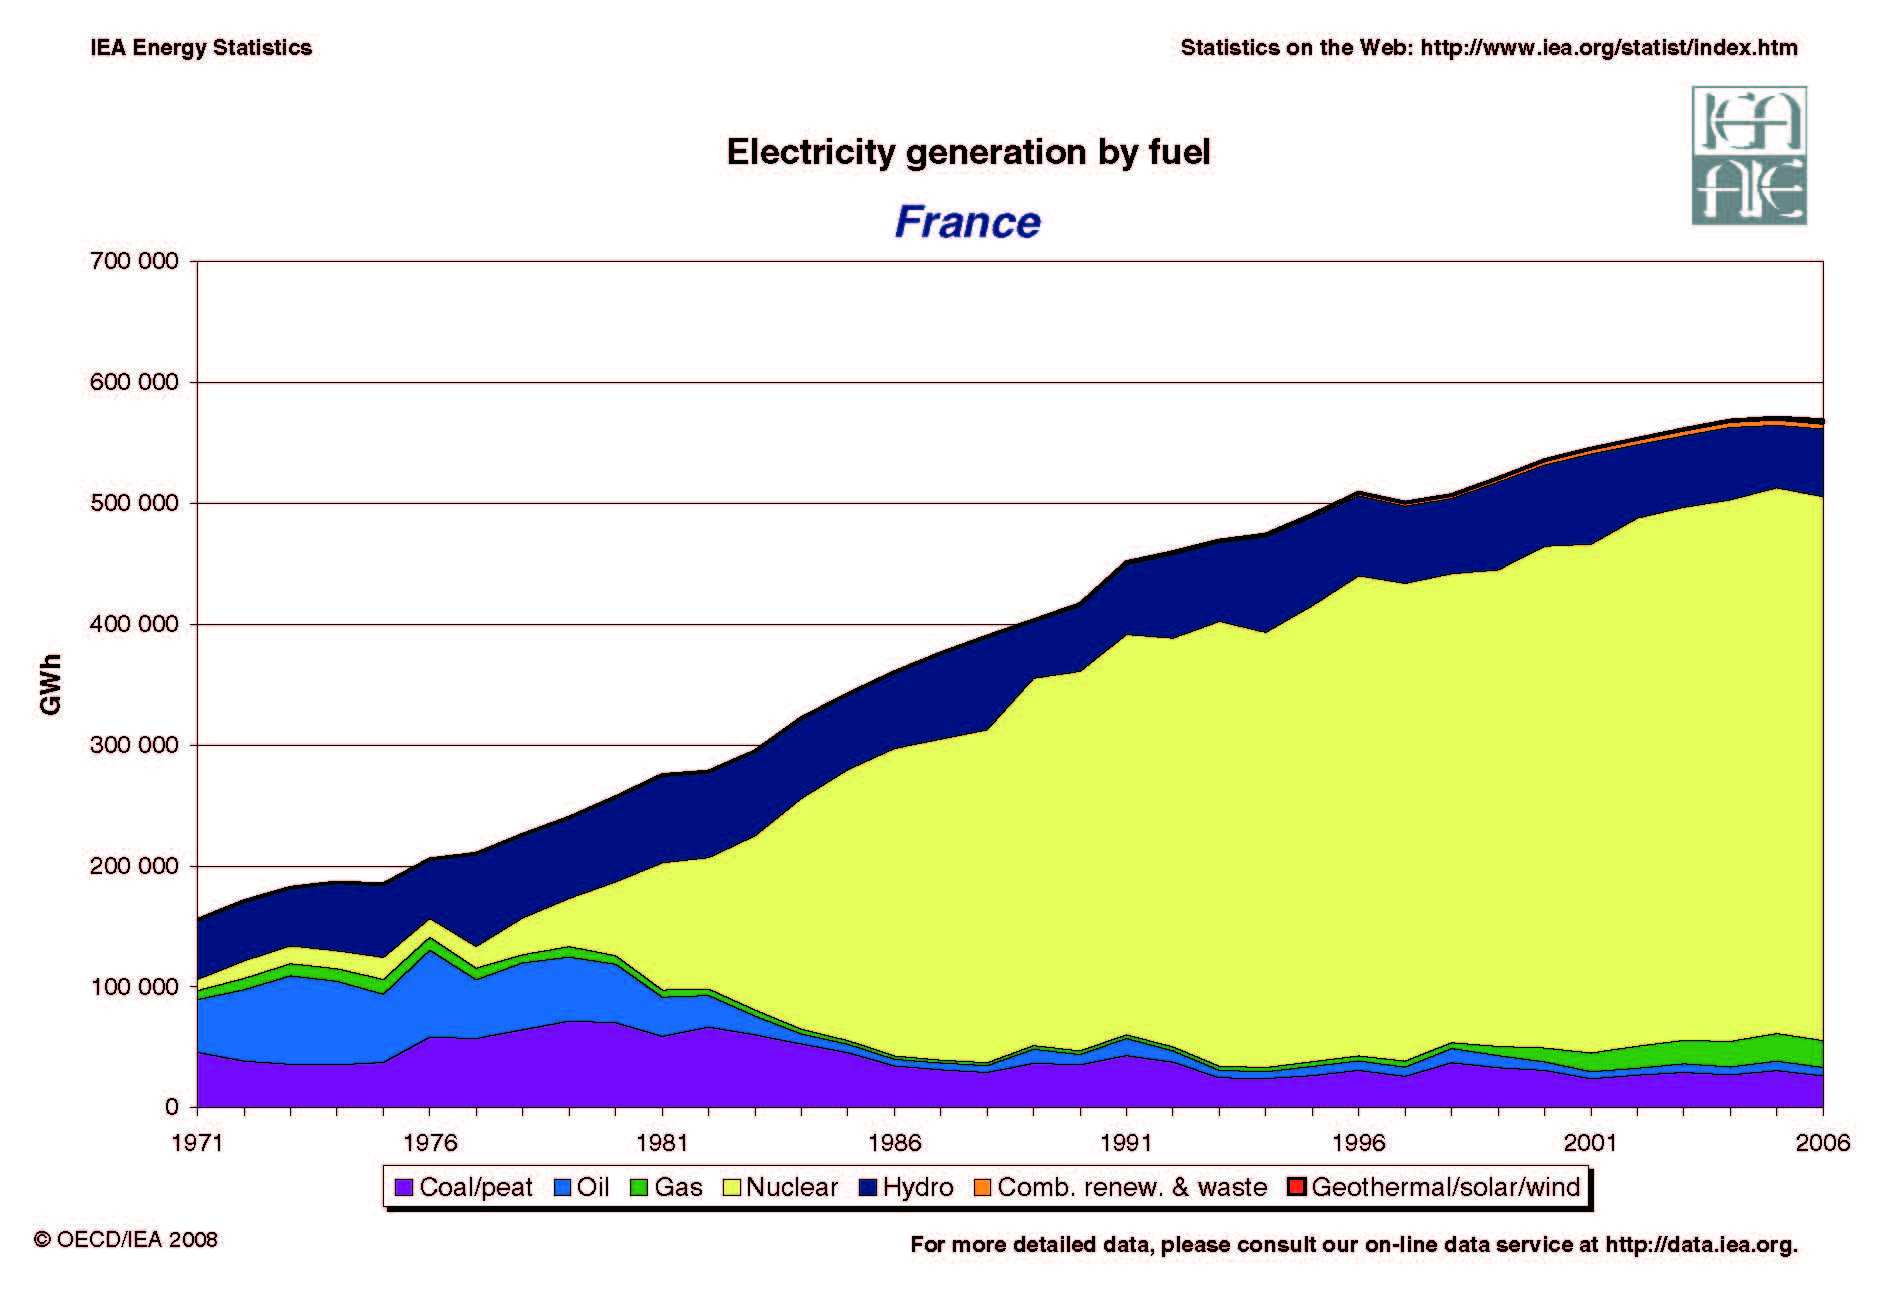 Electricity generation by fuel - France